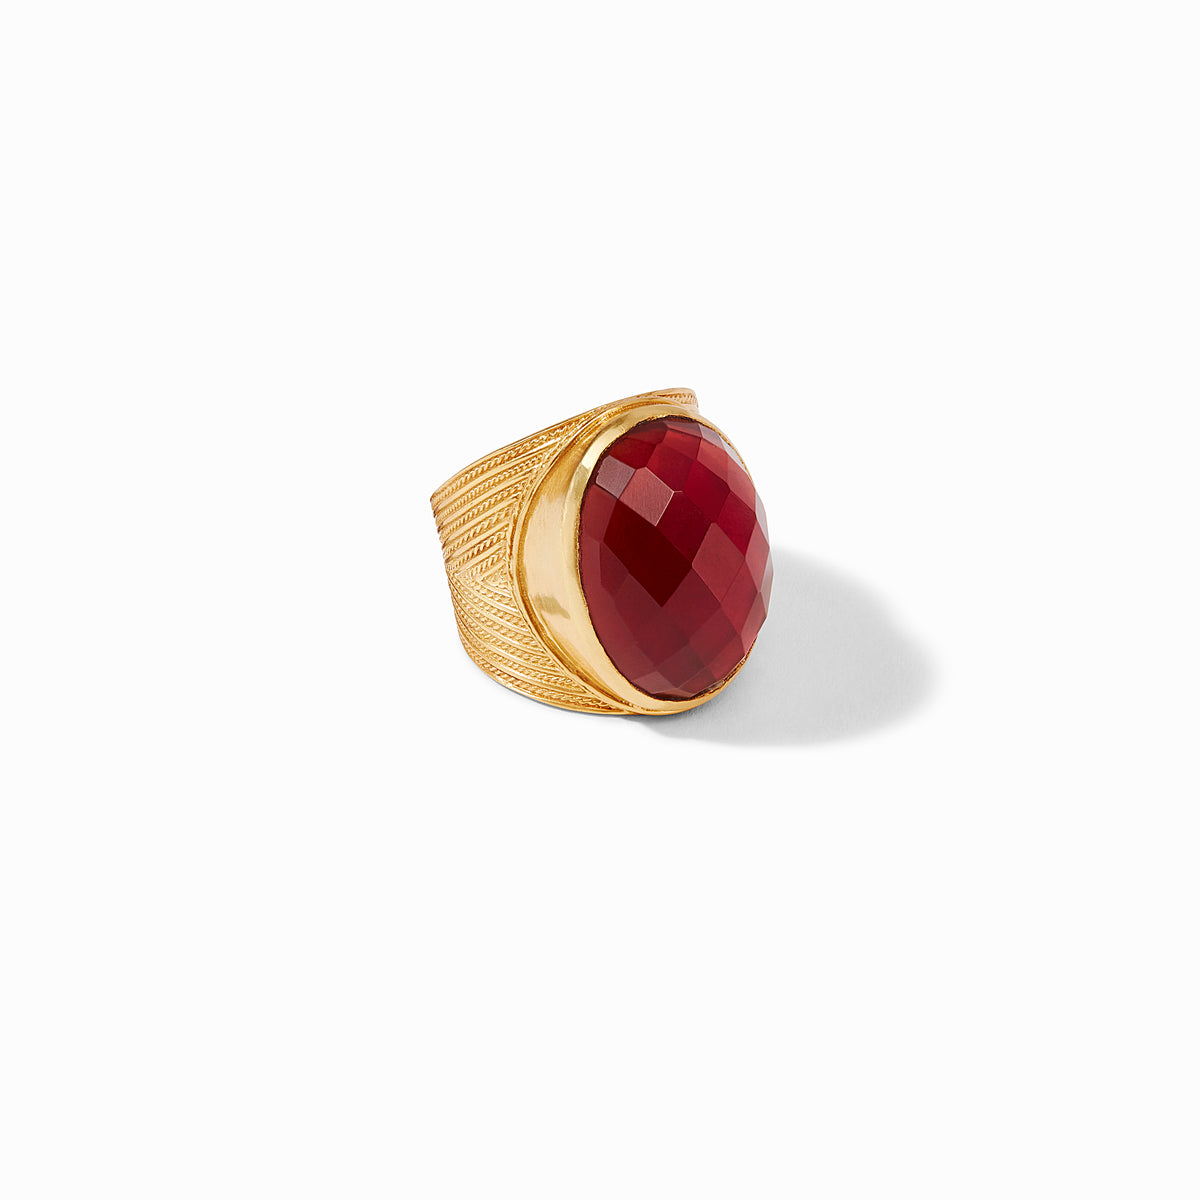 Julie Vos - Verona Statement Ring, Iridescent Ruby Red / 9, Iridescent Ruby Red, ruby red, holiday gift guide, holiday hues, last chance